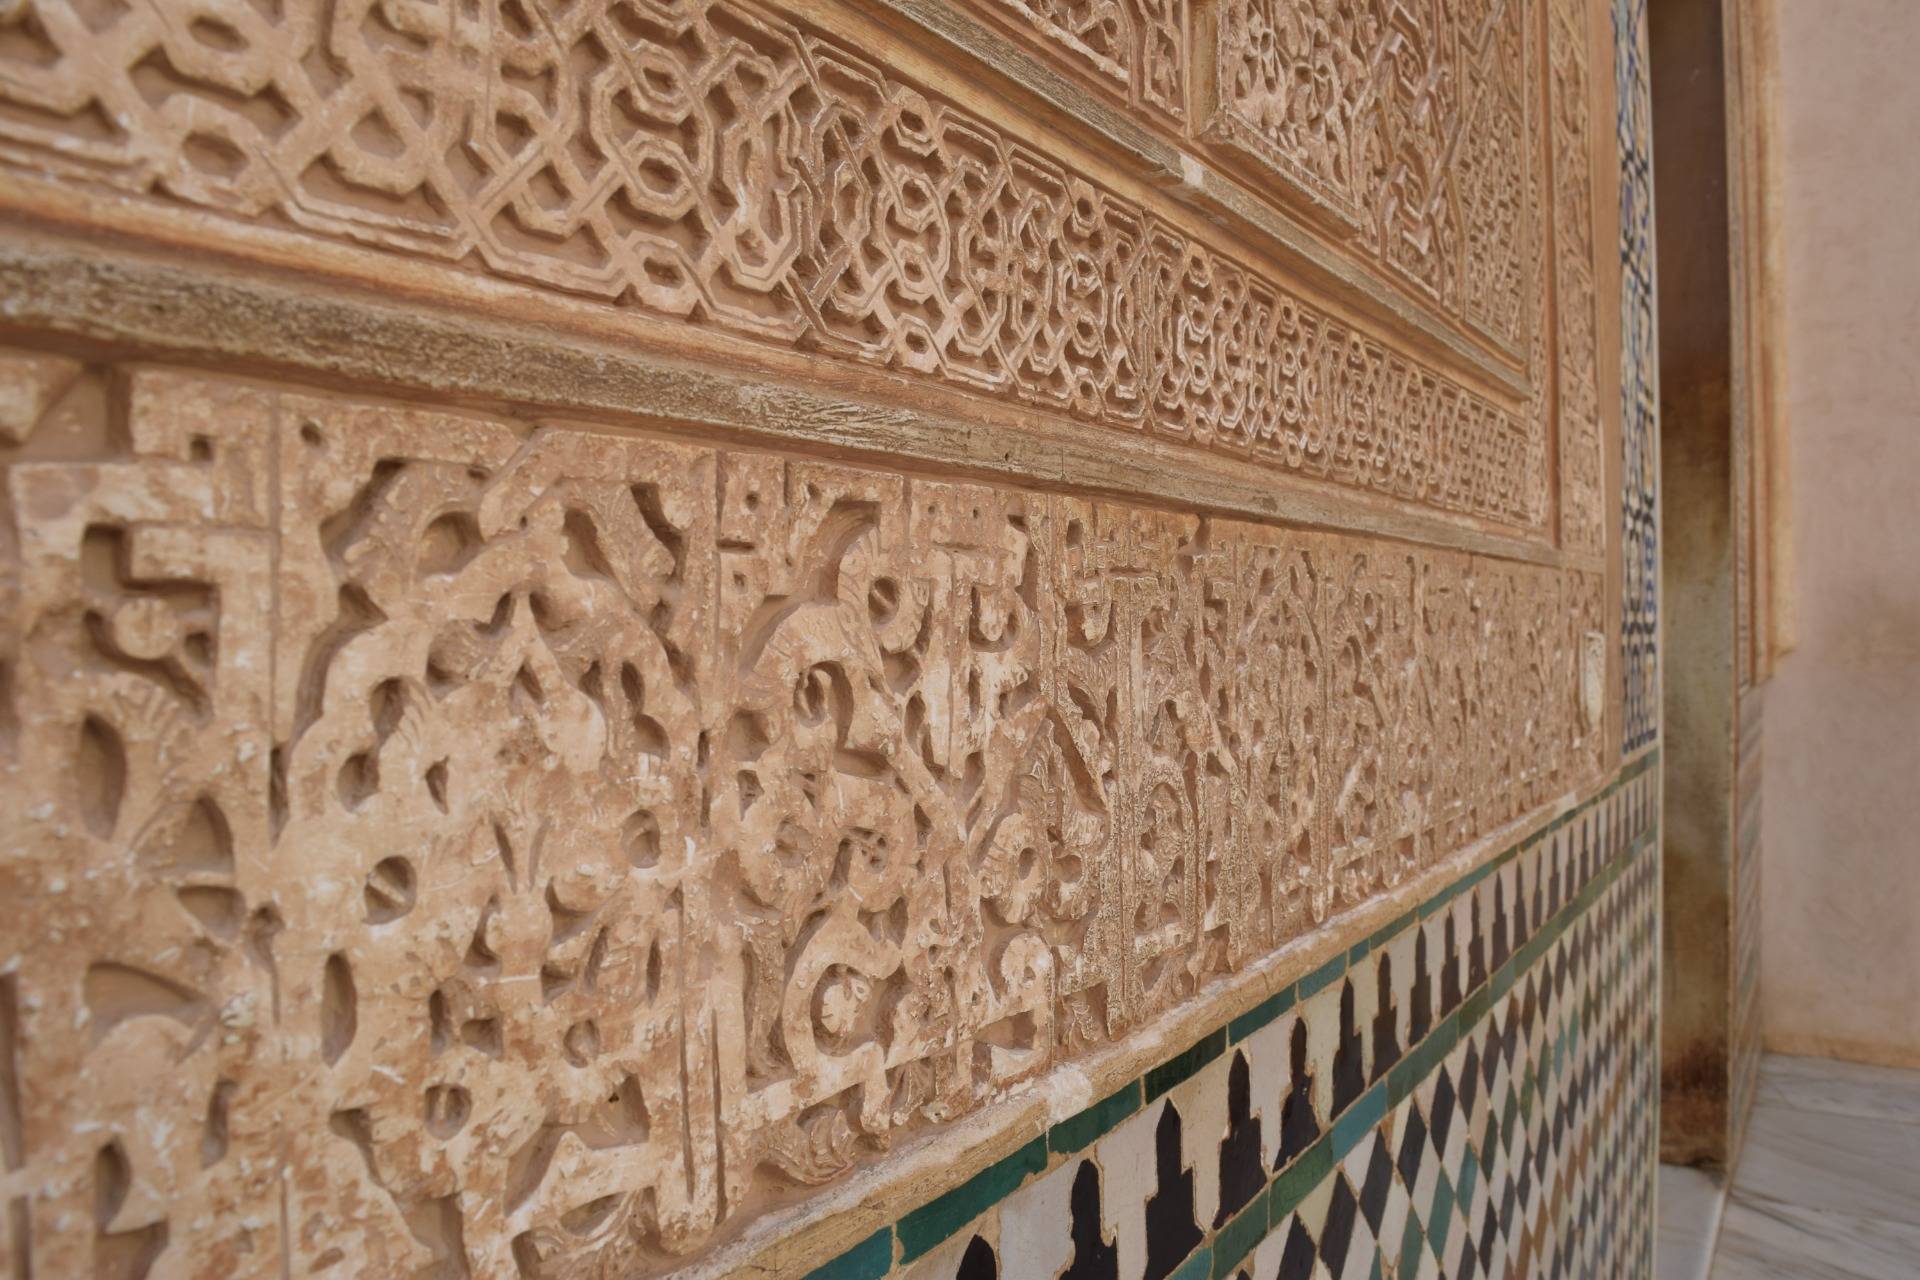 Alhambra - arab palace in Spain